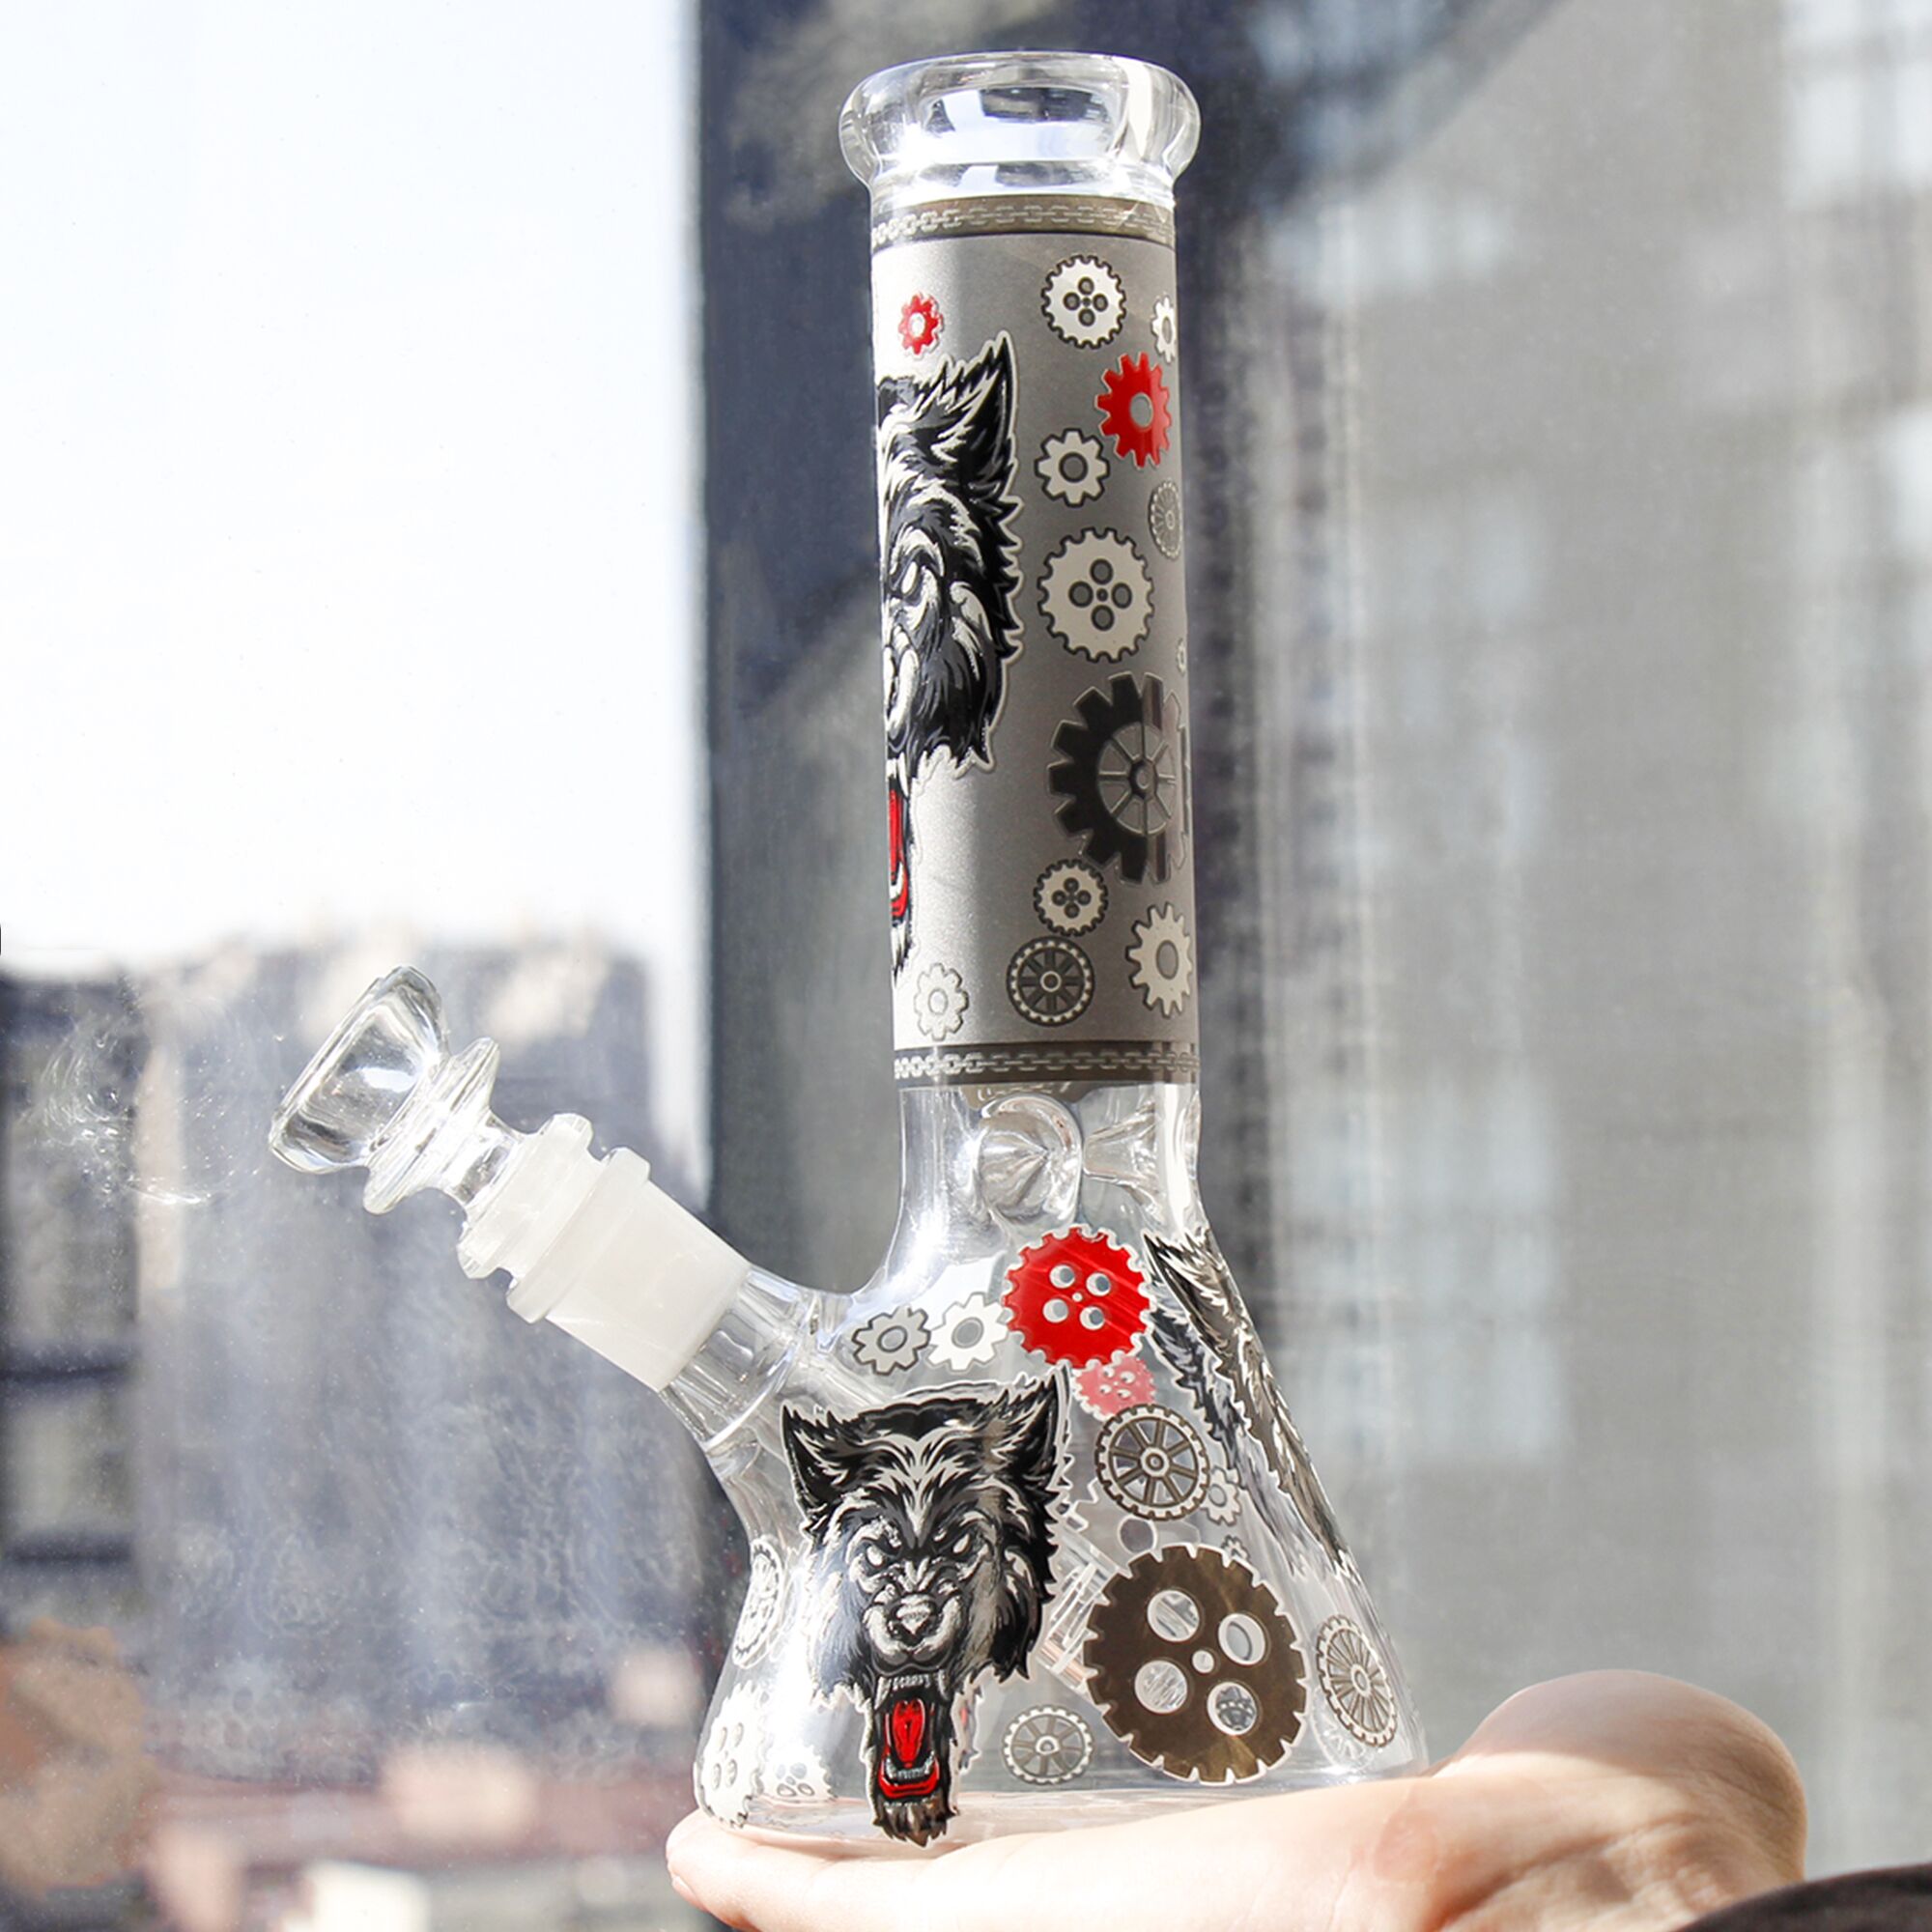 grey wolf 8.7 inches glass smoking bong